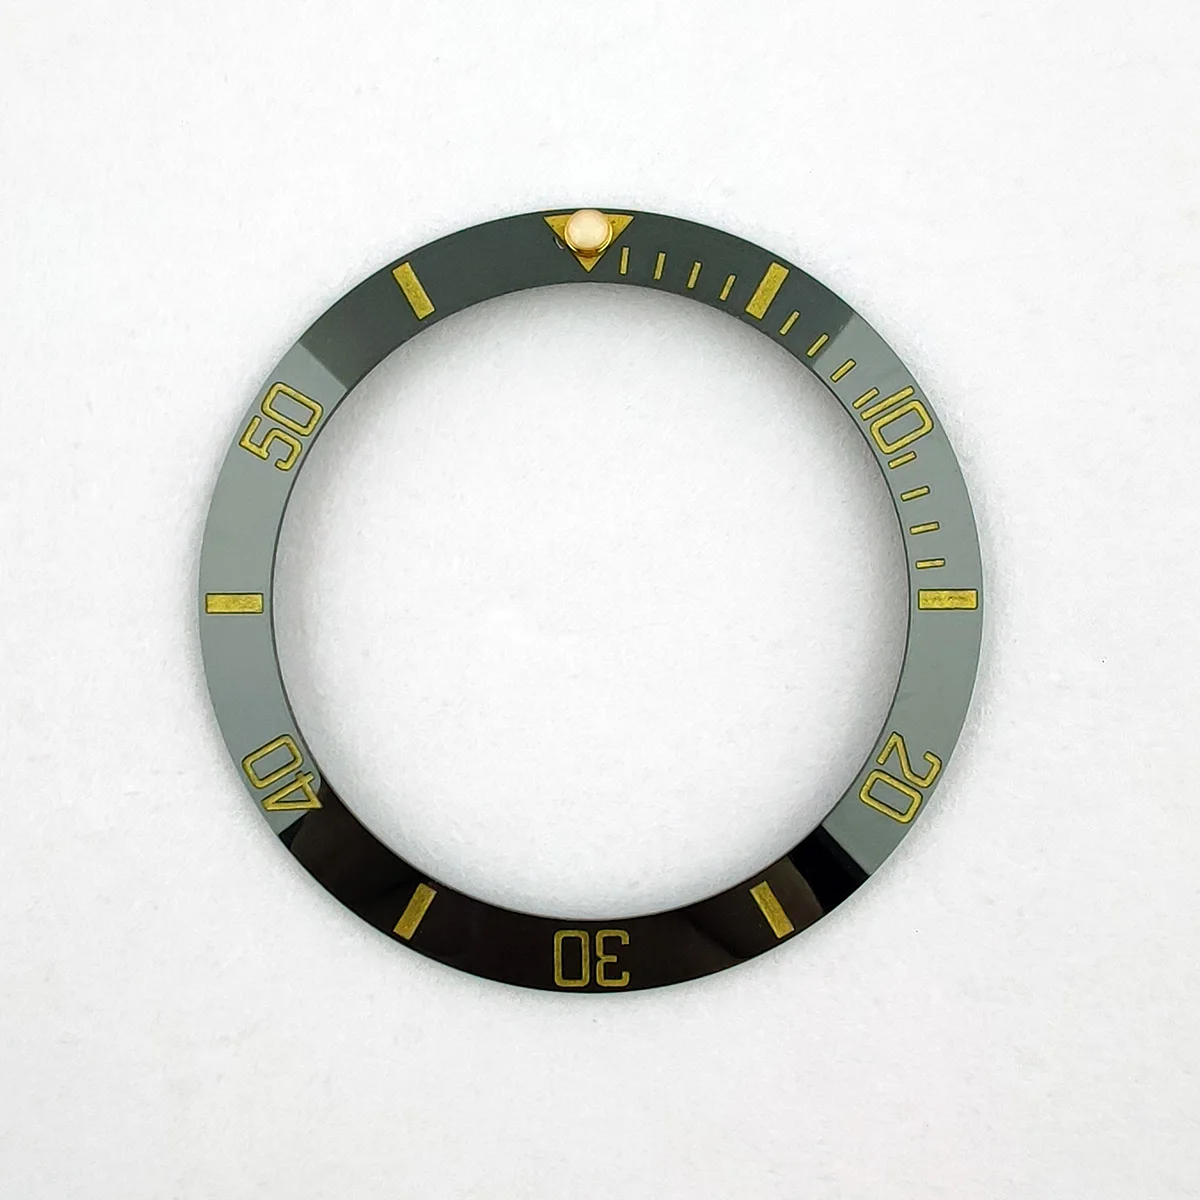 

30.8-38mm Diameter Ceramic Bezel Insert for 40mm Dial for Sub mariner Gmt Japan Watch Face Ring Replacement Accessory RootBeer 5